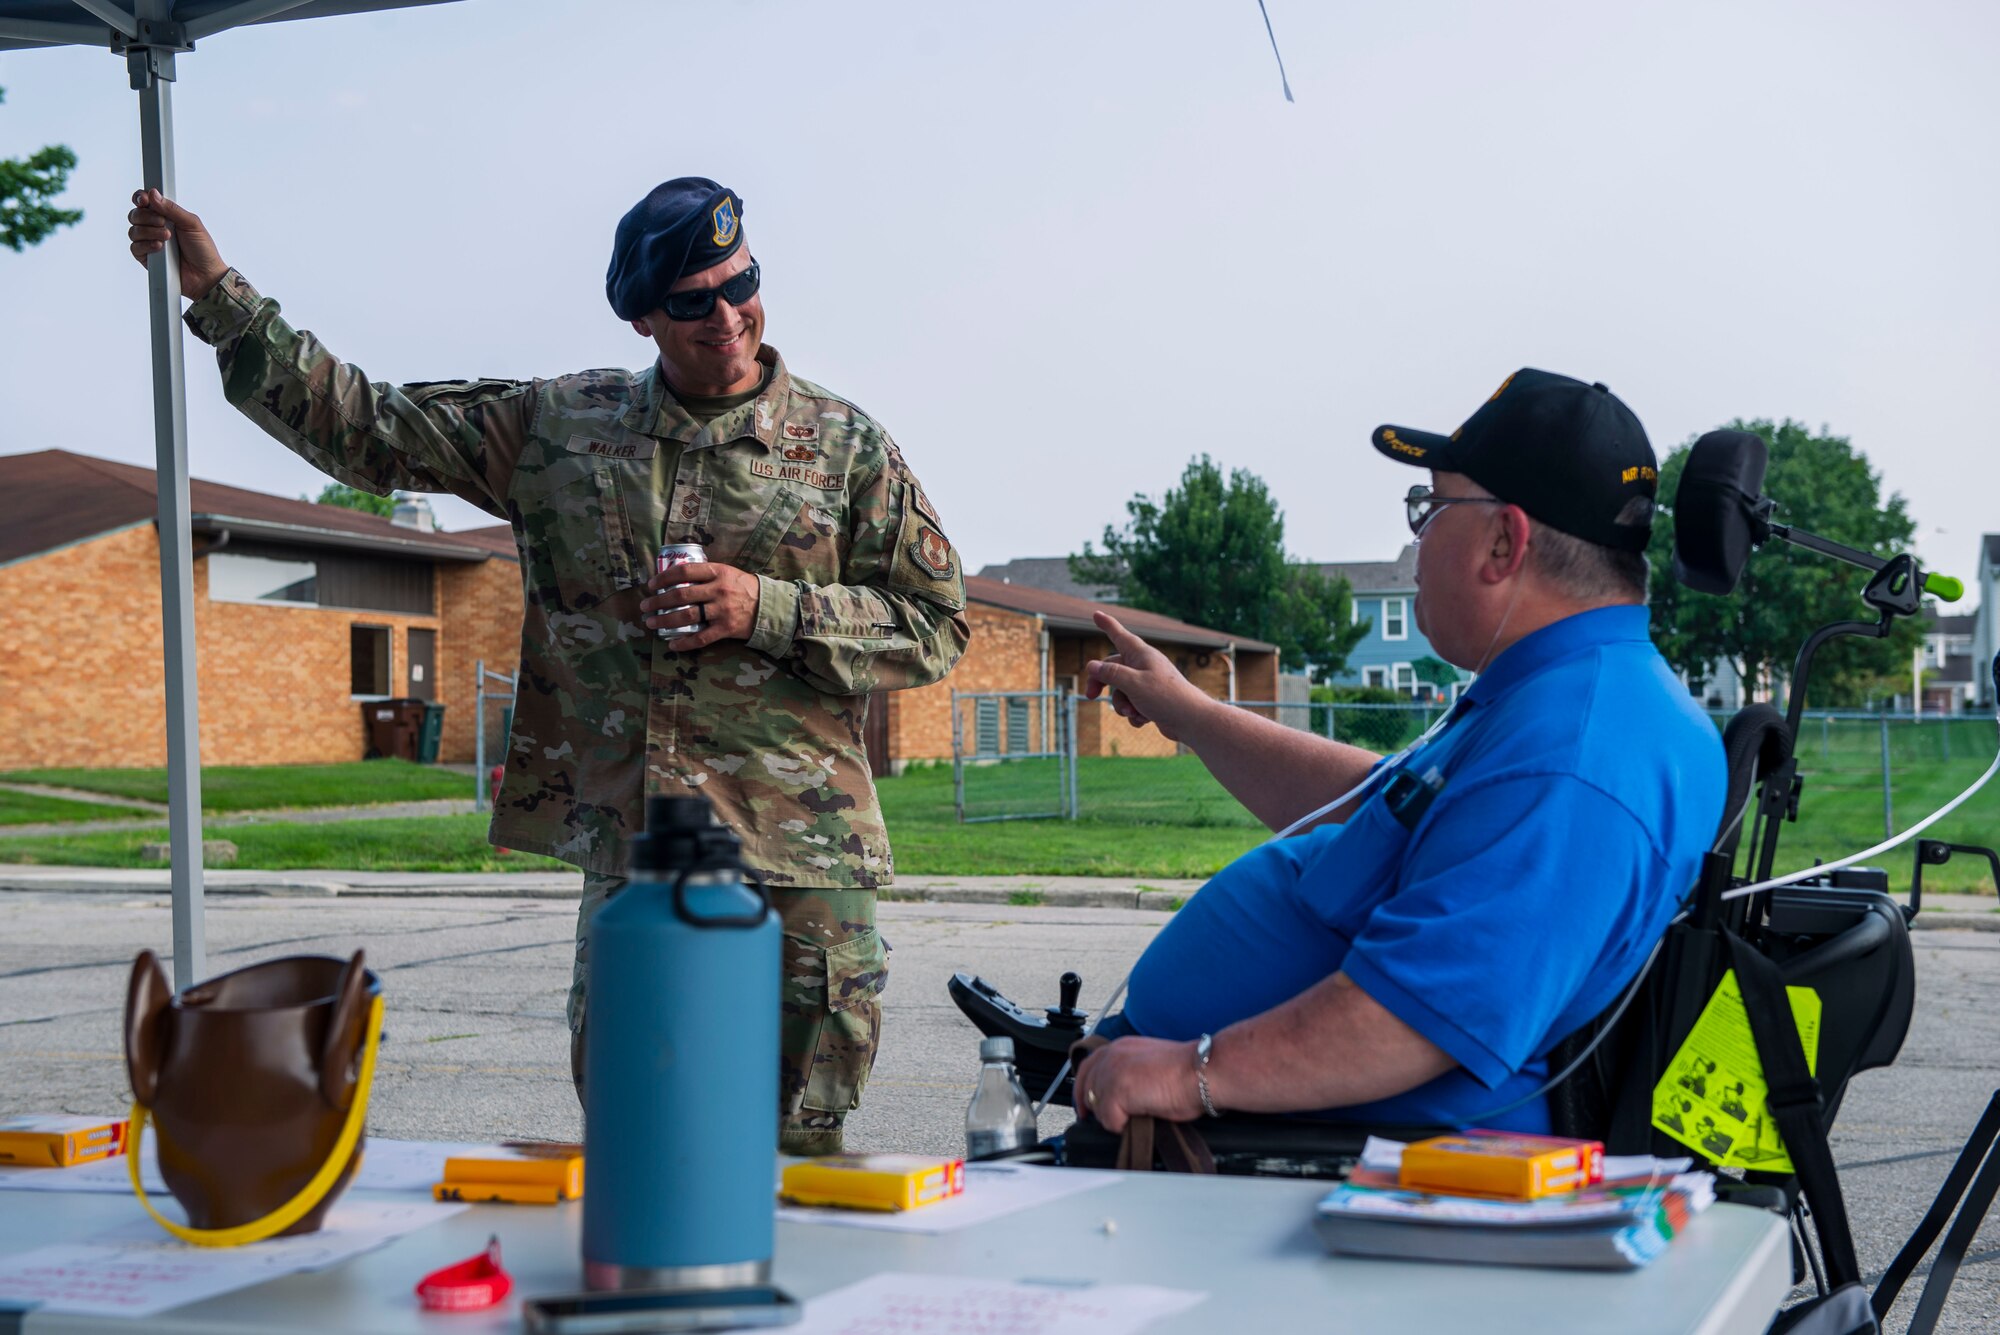 In front of a brown building with trees and grass surrounding it, a military member with a security forces black beret holds a pole in his right hand and a soda can in his right as he looks with a smile to a man in a wheelchair with a bright blue shirt and a black hat as they have a conversation under a tent.